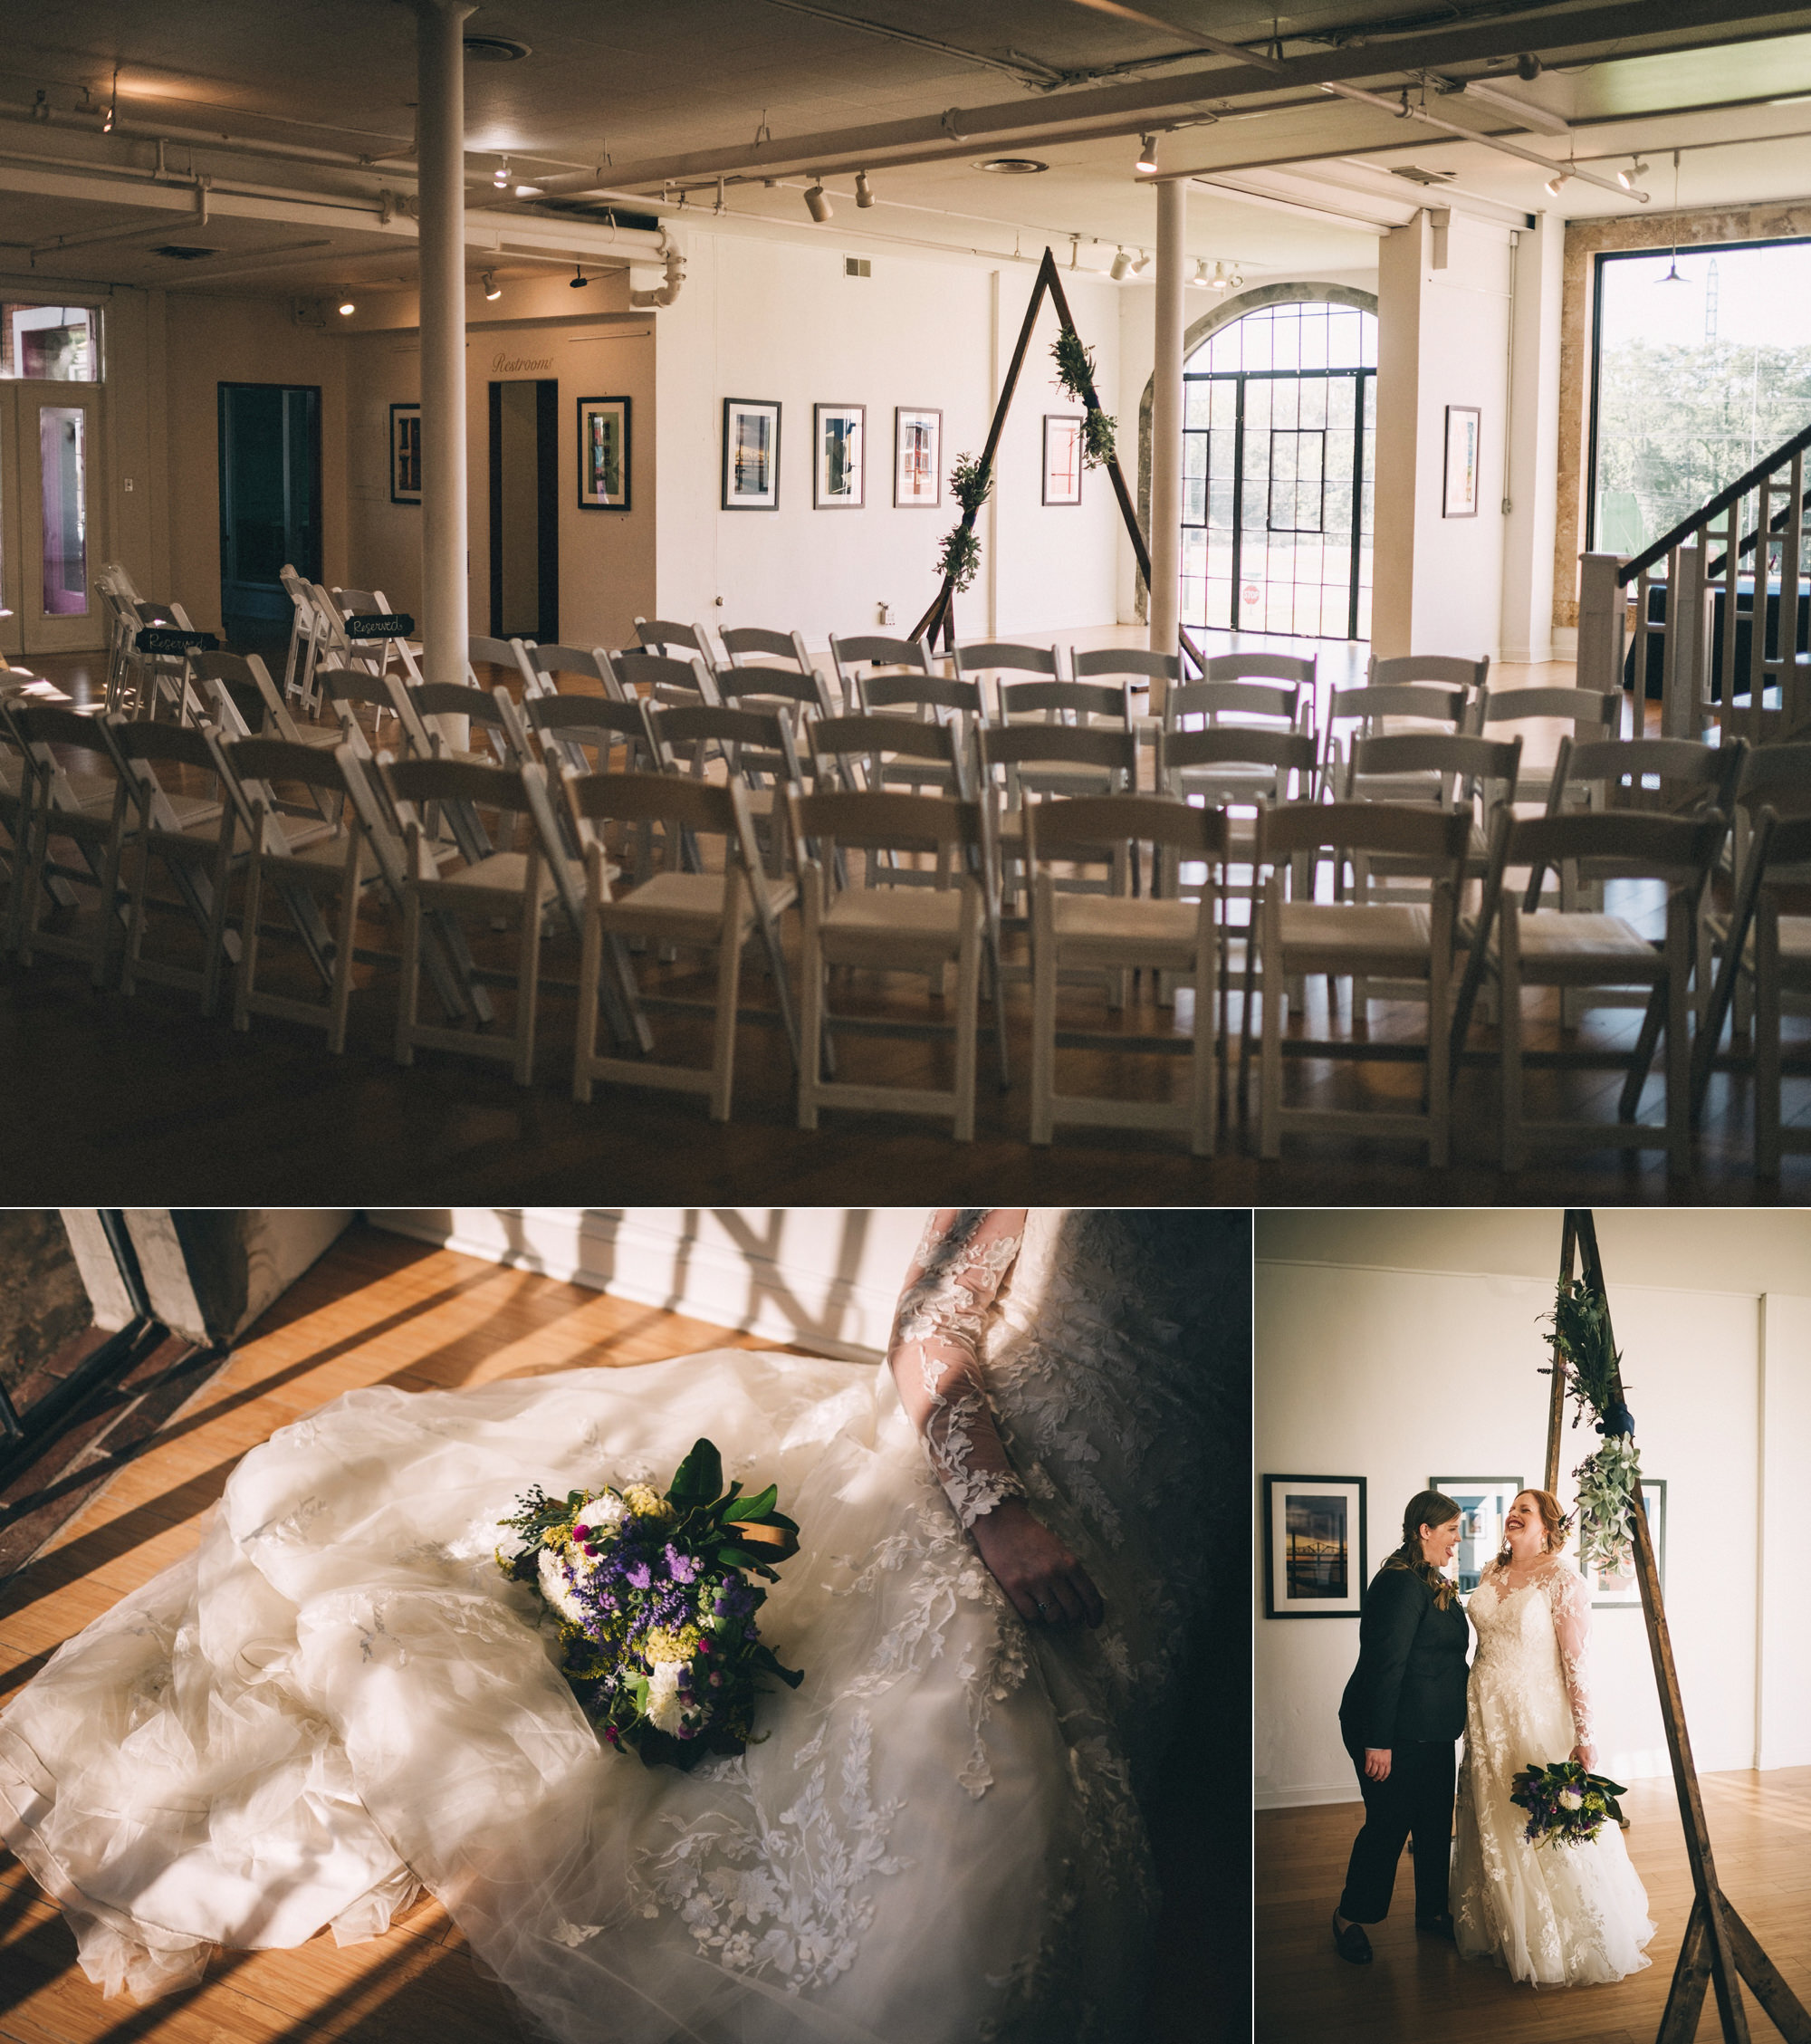  The first image shows a small room with chairs arranged in an arch all facing towards a triangular wedding altar made from wood. There are framed works of art on the walls, and a large industrial window is behind the wedding altar. In the next image